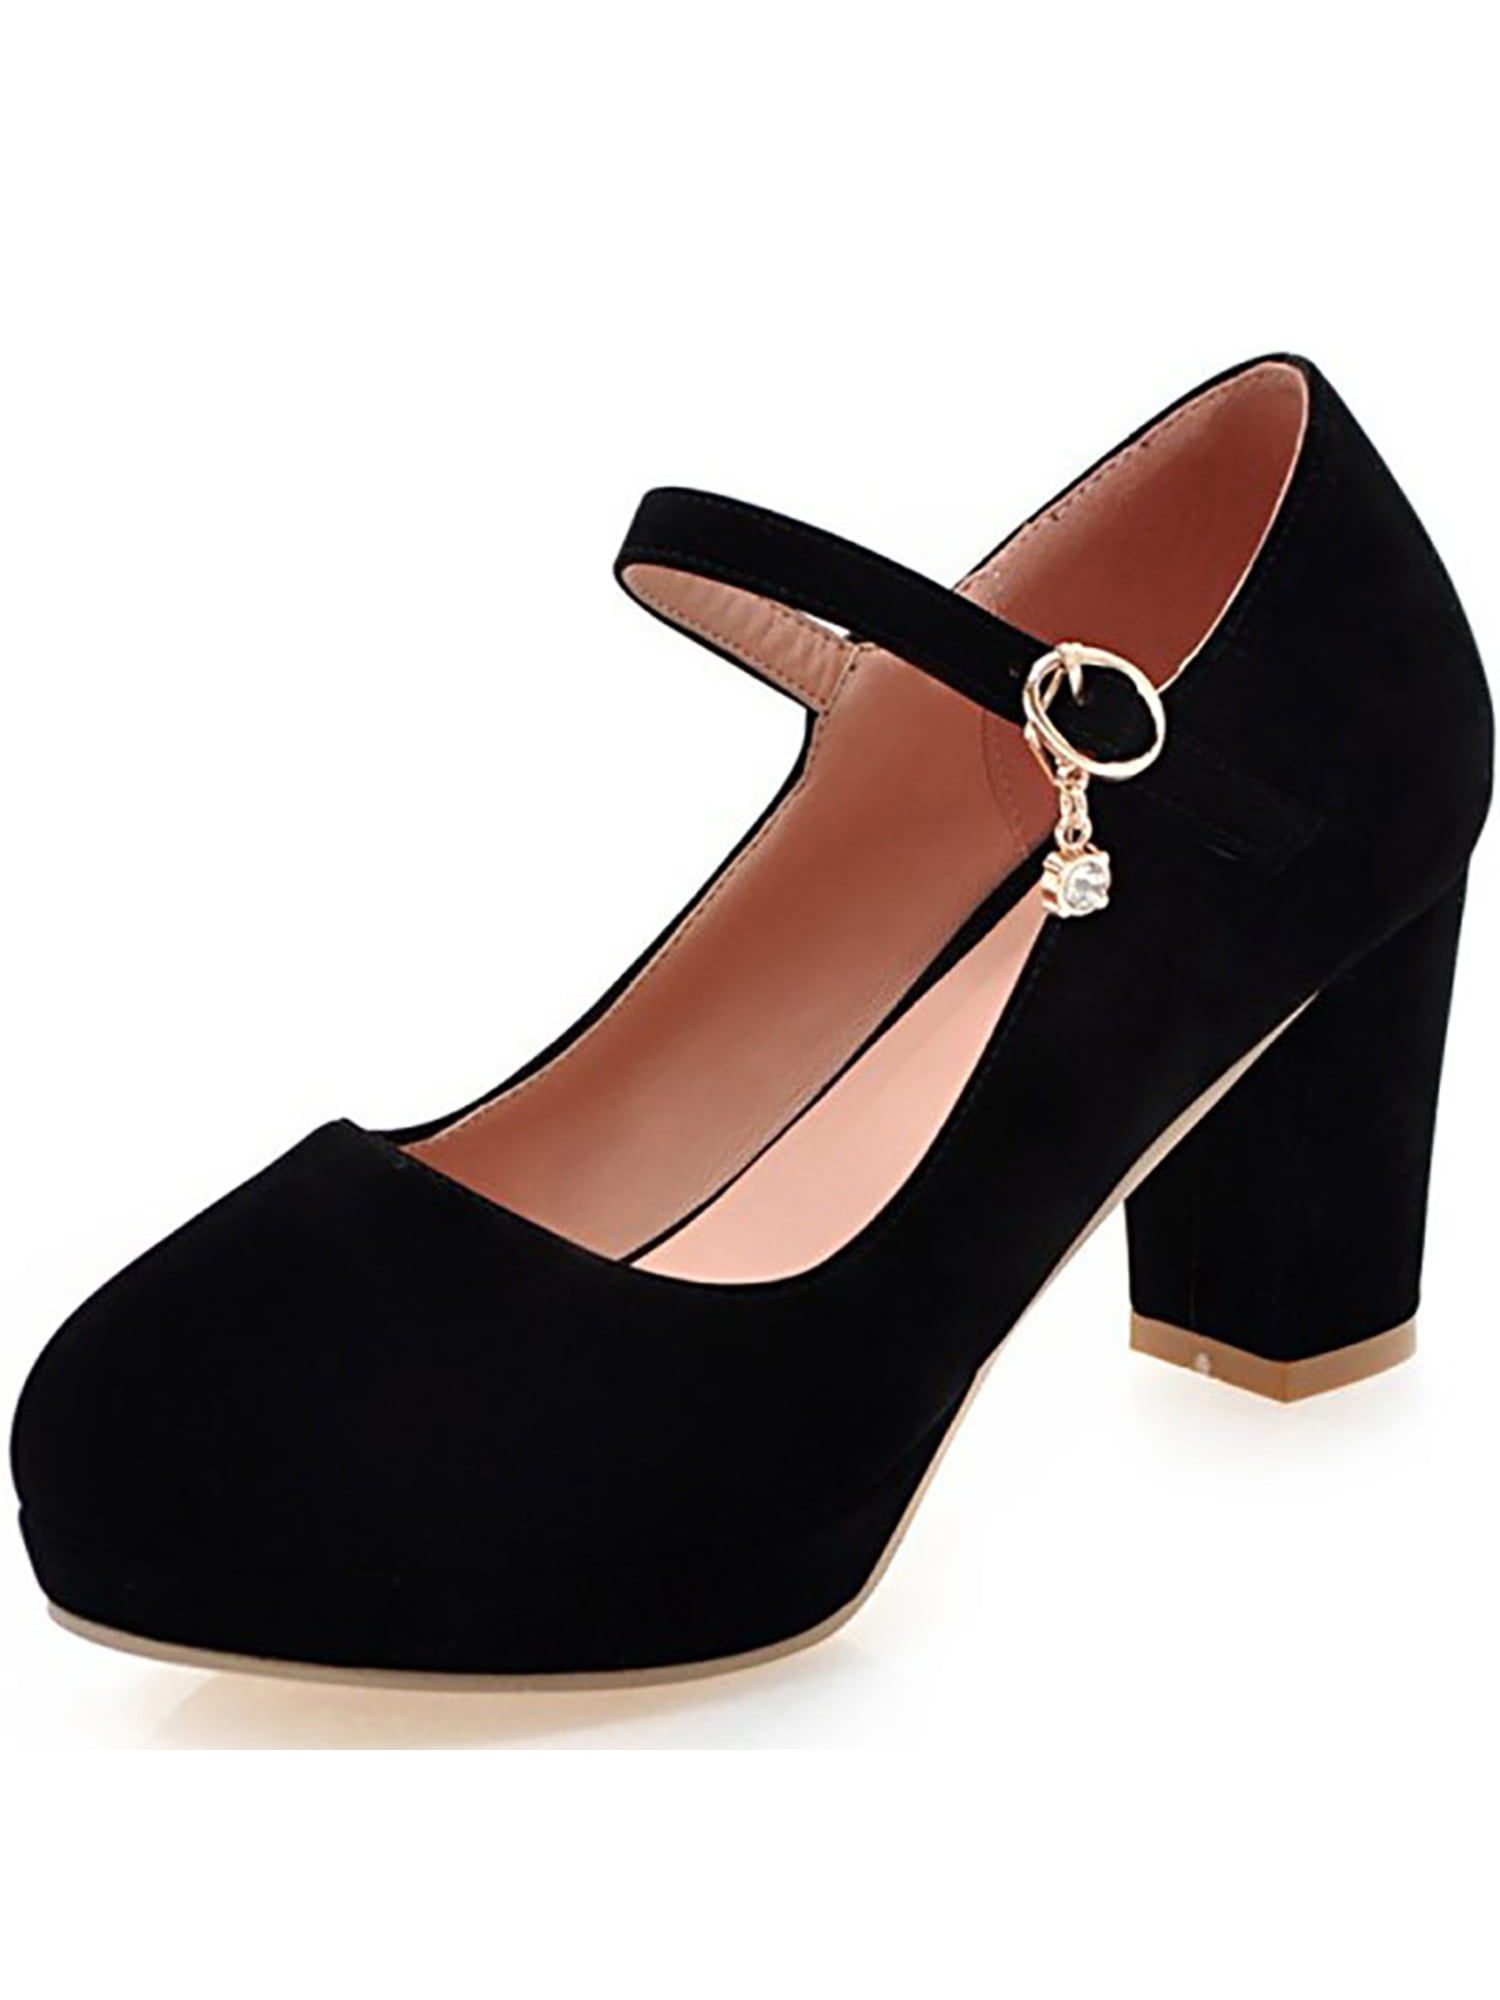 Details about   Women's Round Toe Mary Jane Ladies High Heels Ankle Strap Shoes Work Dress Pumps 